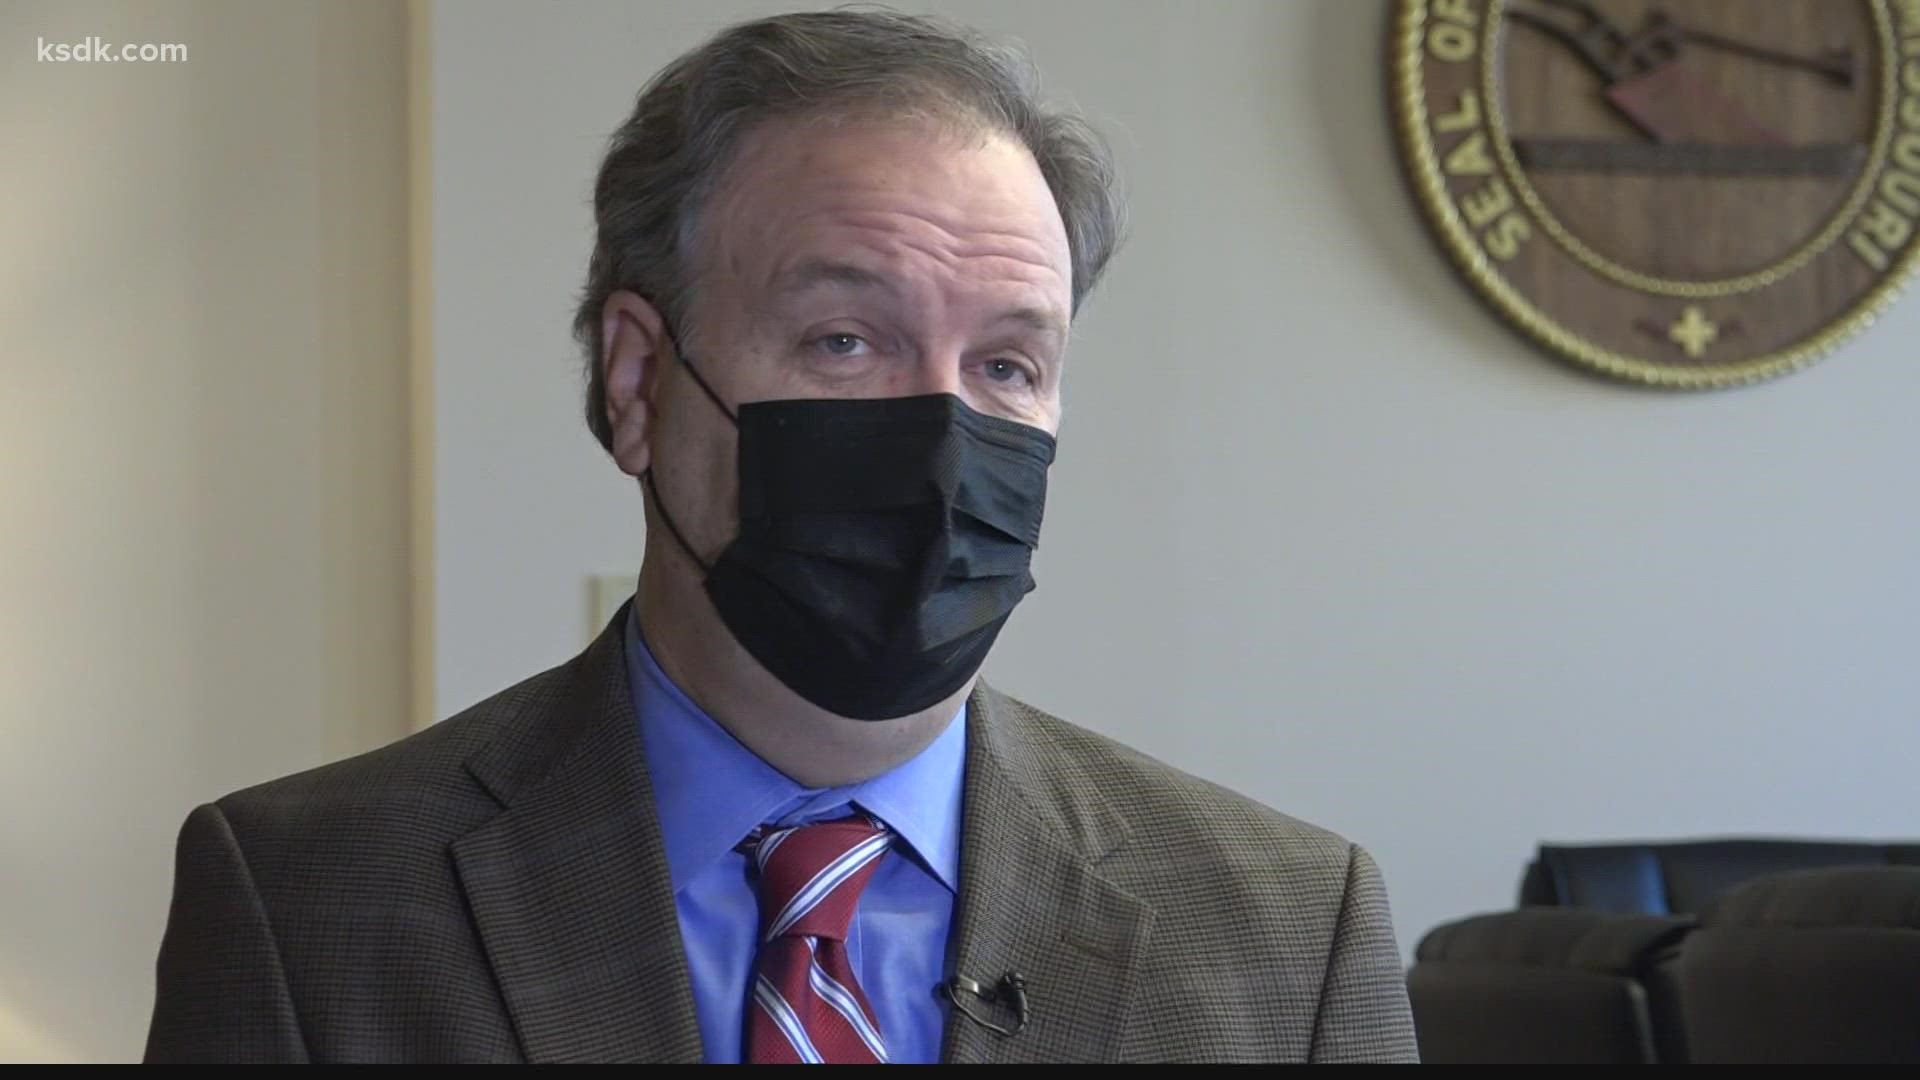 With the new variant top of mind, we talked to St. Louis County Executive Sam Page. He said he still believes masks and the vaccine are the answer.